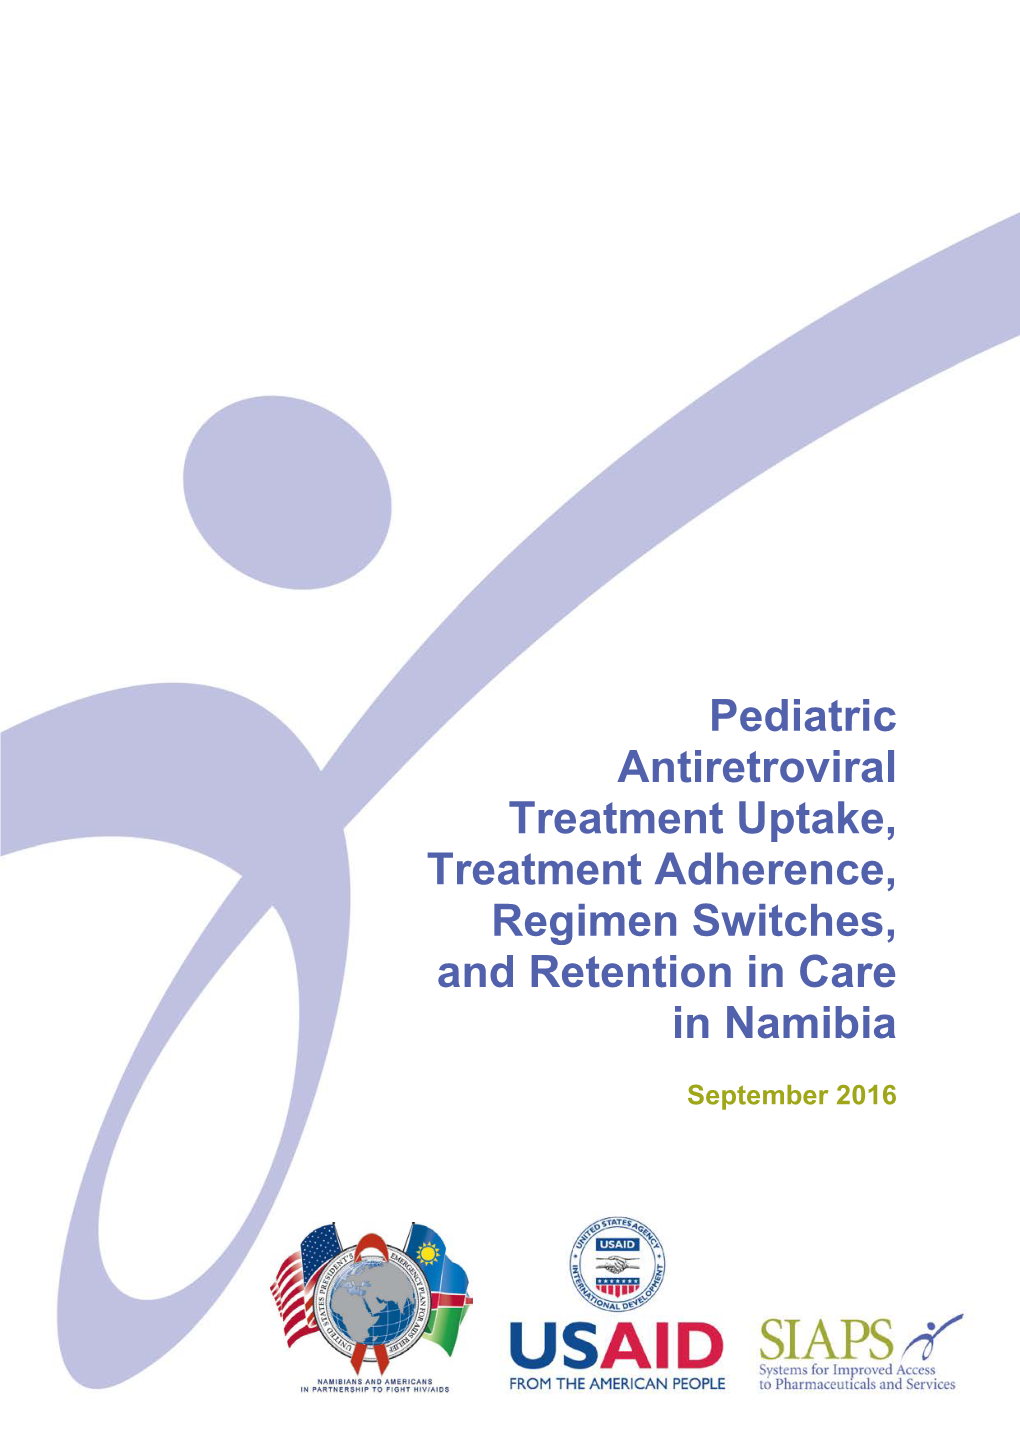 Pediatric Antiretroviral Treatment Uptake, Treatment Adherence, Regimen Switches, and Retention in Care in Namibia